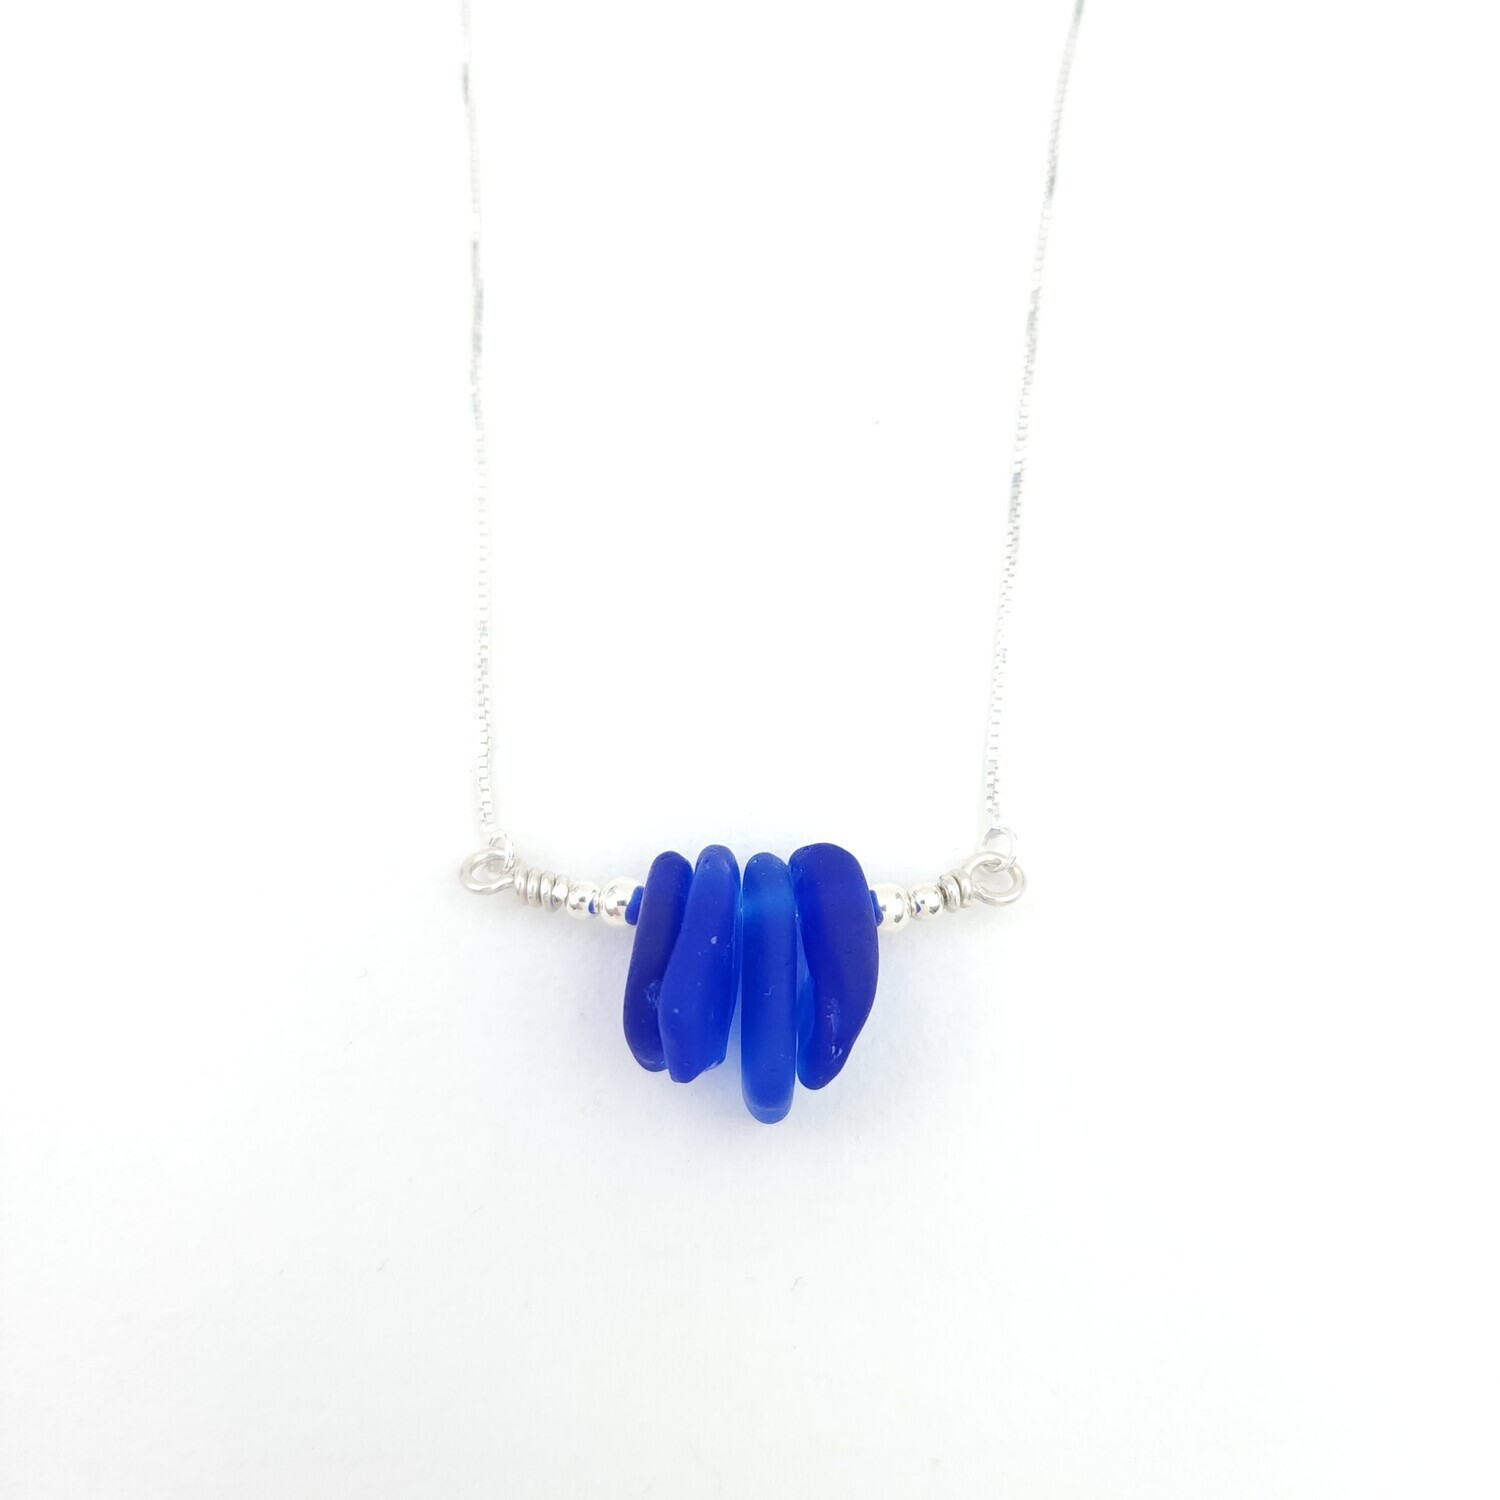 Cobalt Blue Lake Erie Beach Glass Bar Necklace with Sterling Silver Beads